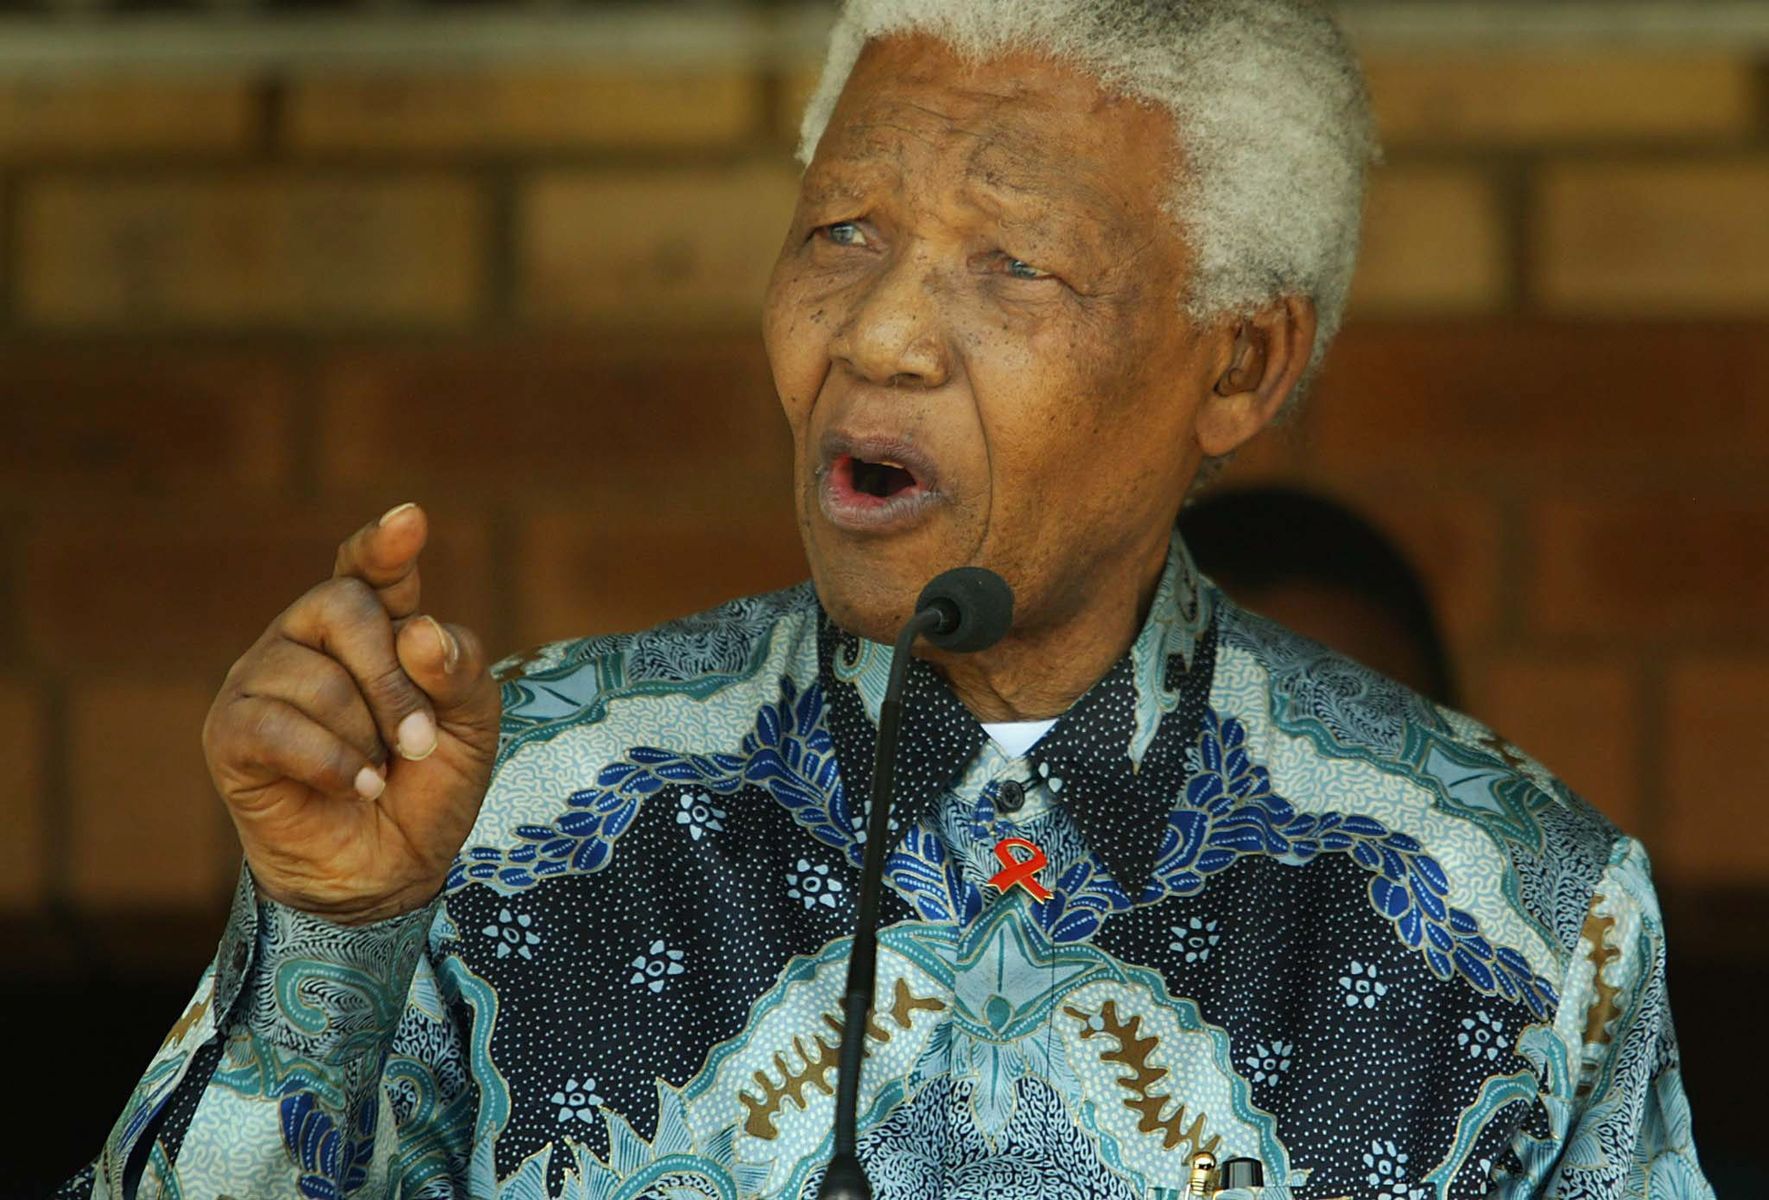 <p>Faced with continuing protests, the South African government tried several times to negotiate with its famous prisoner, offering to release him on condition that he <a href="https://www.facinghistory.org/confronting-apartheid/chapter-3/mandelas-strategic-decision" rel="noreferrer noopener">retire from politics and call for an end to violence</a>. Mandela replied that only a free man can negotiate and that he didn’t want freedom for himself alone. In a message read to his people, he said, “<a href="https://humanrights.ca/story/the-story-of-nelson-mandela?_gl=1*k3trjs*_ga*MTc0OTI2ODY1MC4xNjU4Nzc5NDc2*_ga_H5CQX3NE8X*MTY1ODc4MTc1NC4yLjEuMTY1ODc4MTkyMi42MA.." rel="noreferrer noopener">Your freedom and mine cannot be separated</a>.”</p>